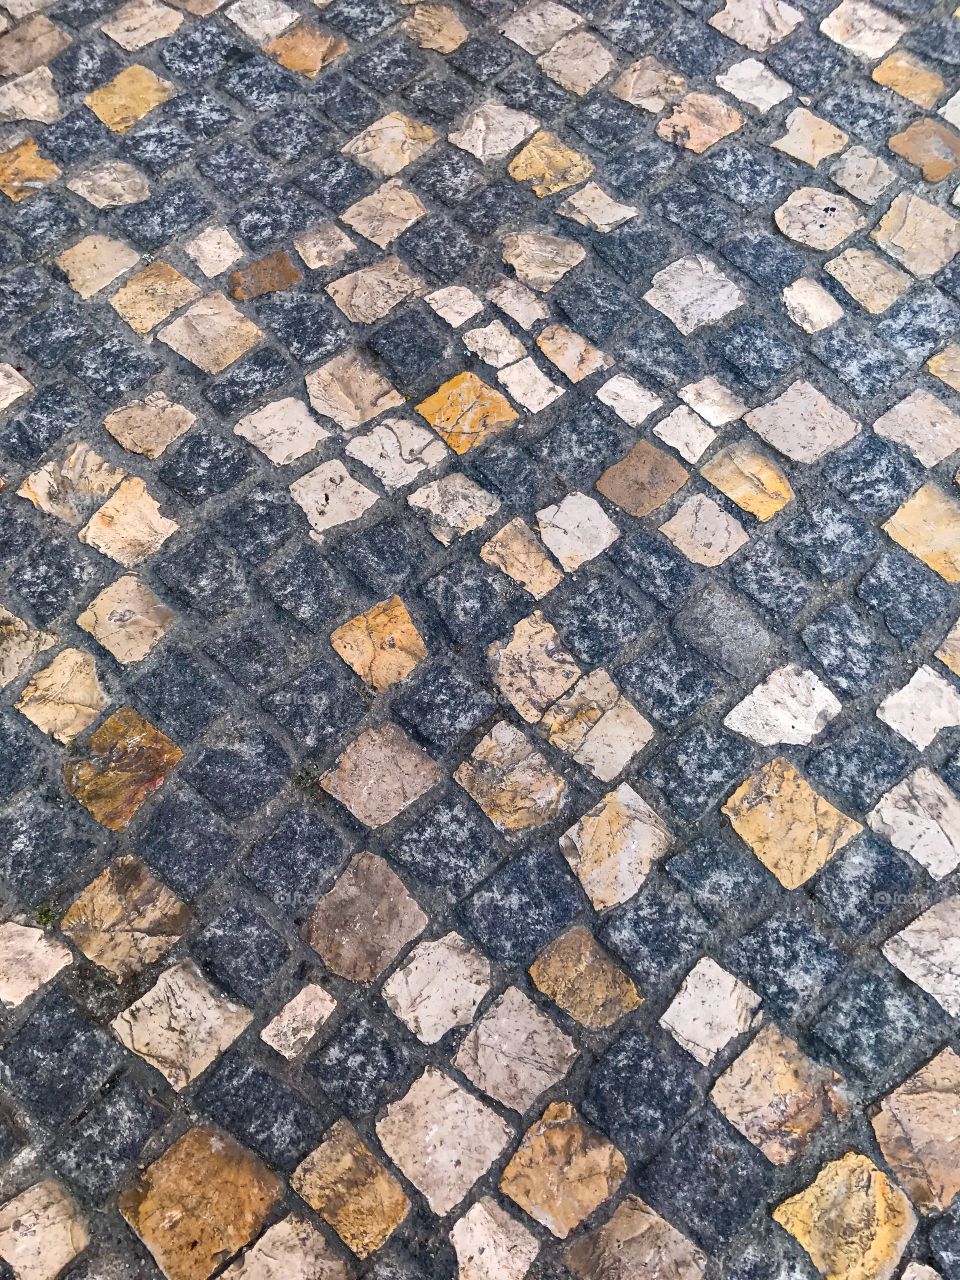 Textured cobble stones - Textures of the World Mission